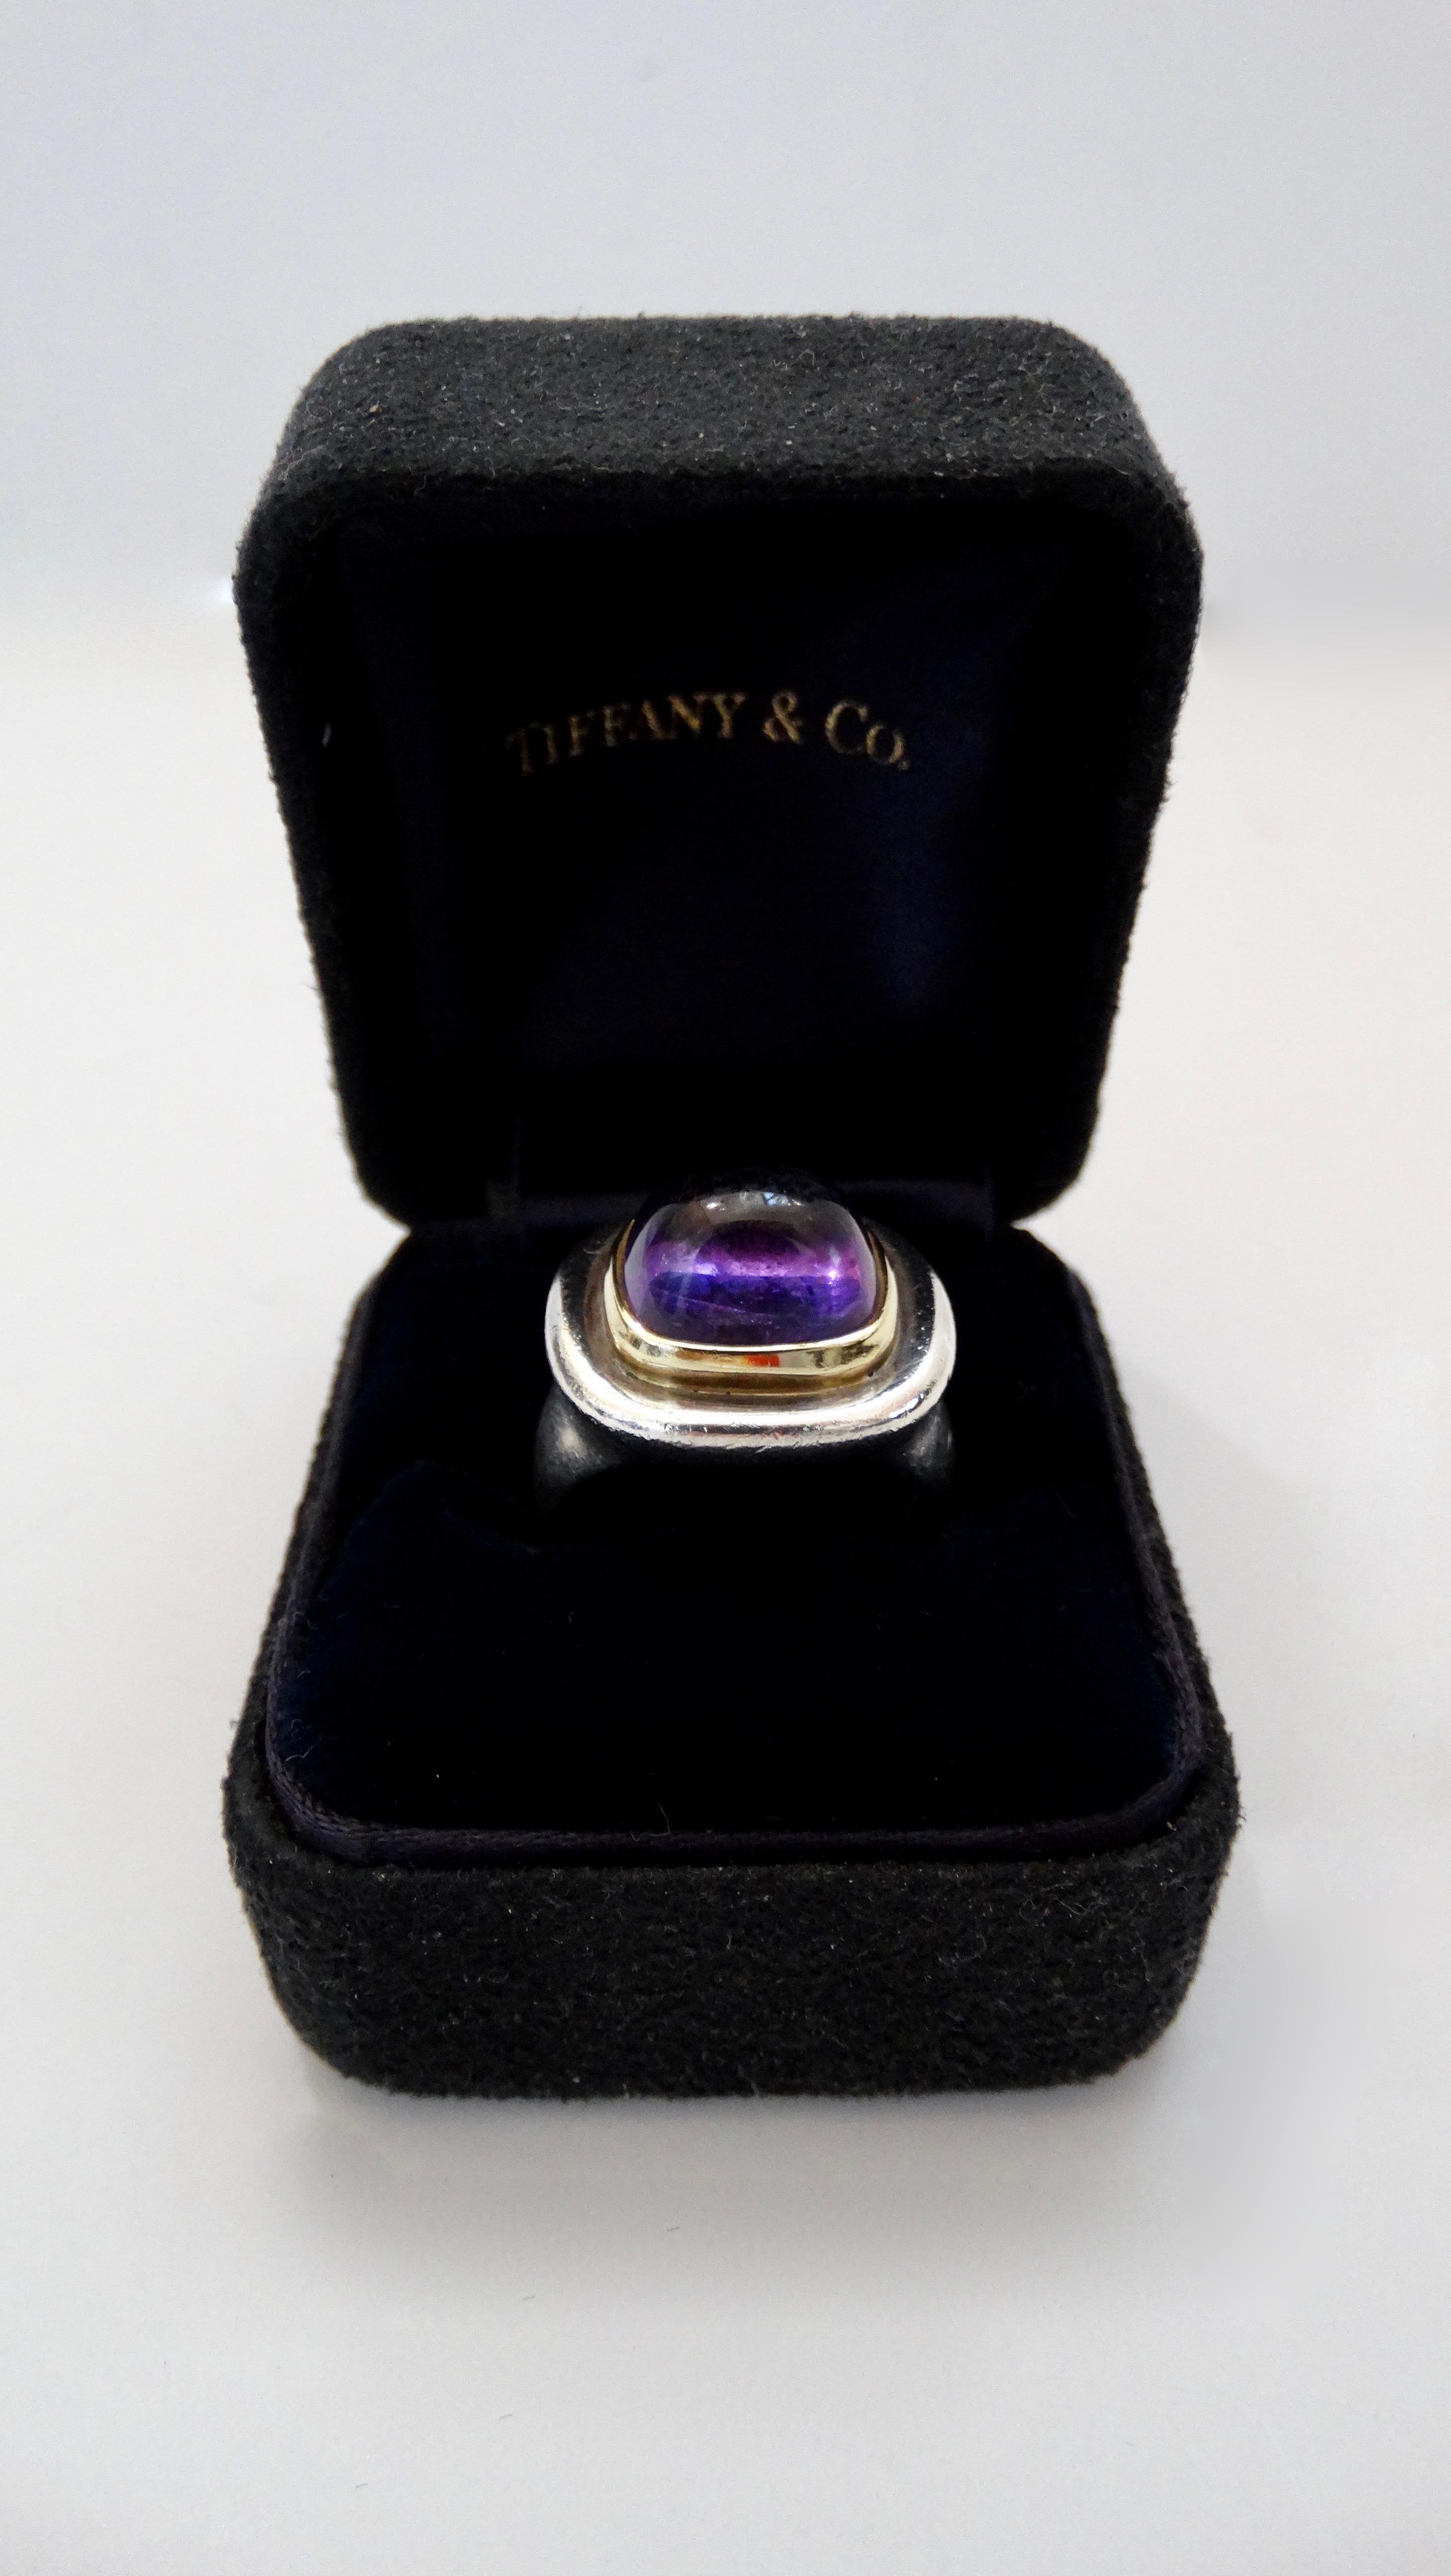 Gorgeous 1980s Paloma Picasso for Tiffany & Co. ring crafted from 18k Gold and Sterling Silver. Features a tiered setting with a cushion cut Amethyst Cabochon as the center stone. Total weight in grams is 11.6 and is a size 7.5.  

Note: 